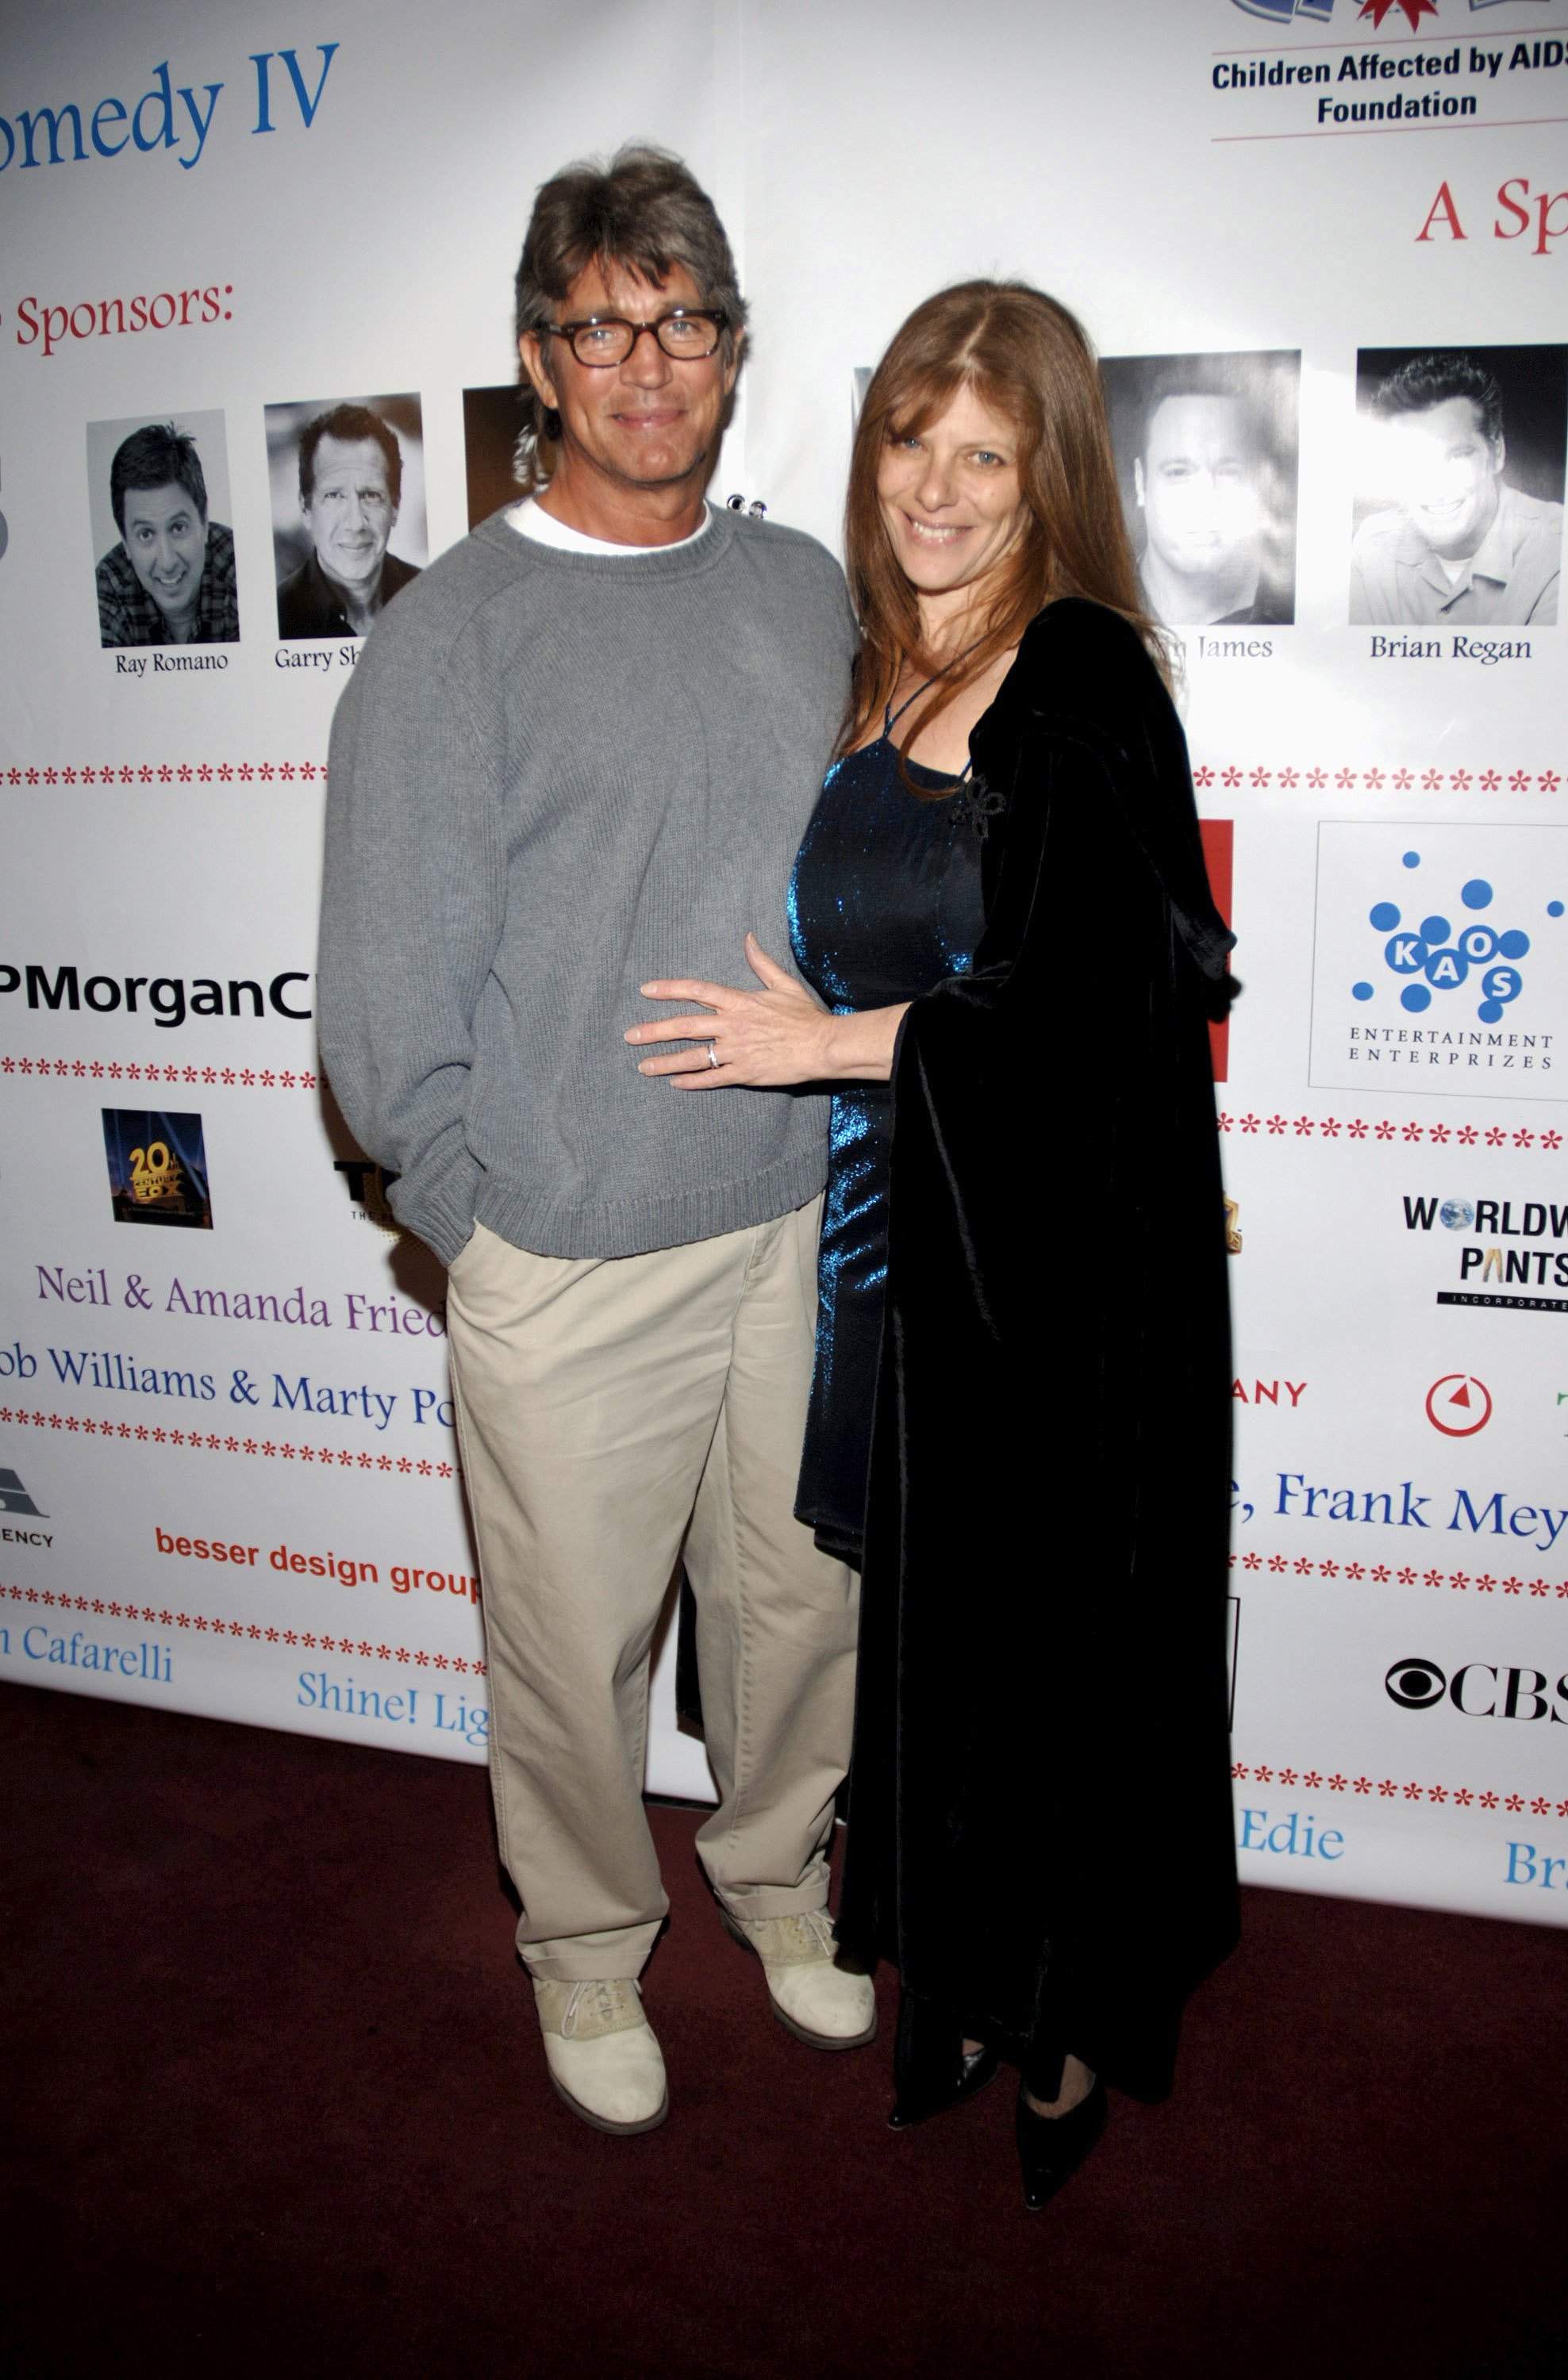 Eric Roberts and Eliza Roberts at the Night Of Comedy IV benefiting the Children Affected by AIDS Foundation at the Wilshire Theatre on April 8, 2006 in Beverly Hills, California. | Source: Getty Images